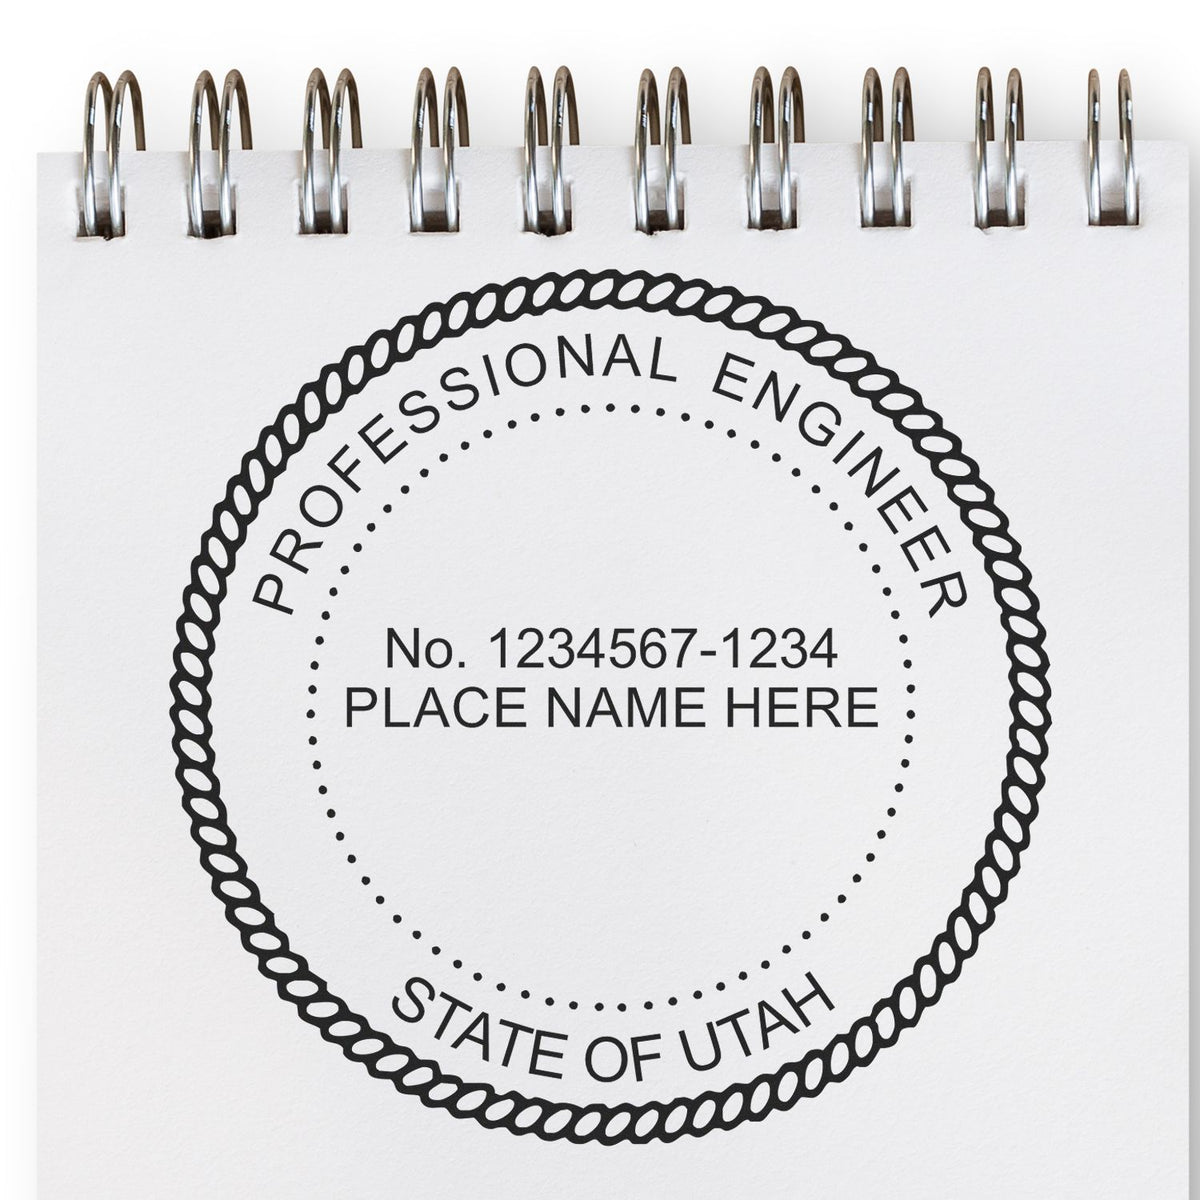 A stamped impression of the Self-Inking Utah PE Stamp in this stylish lifestyle photo, setting the tone for a unique and personalized product.